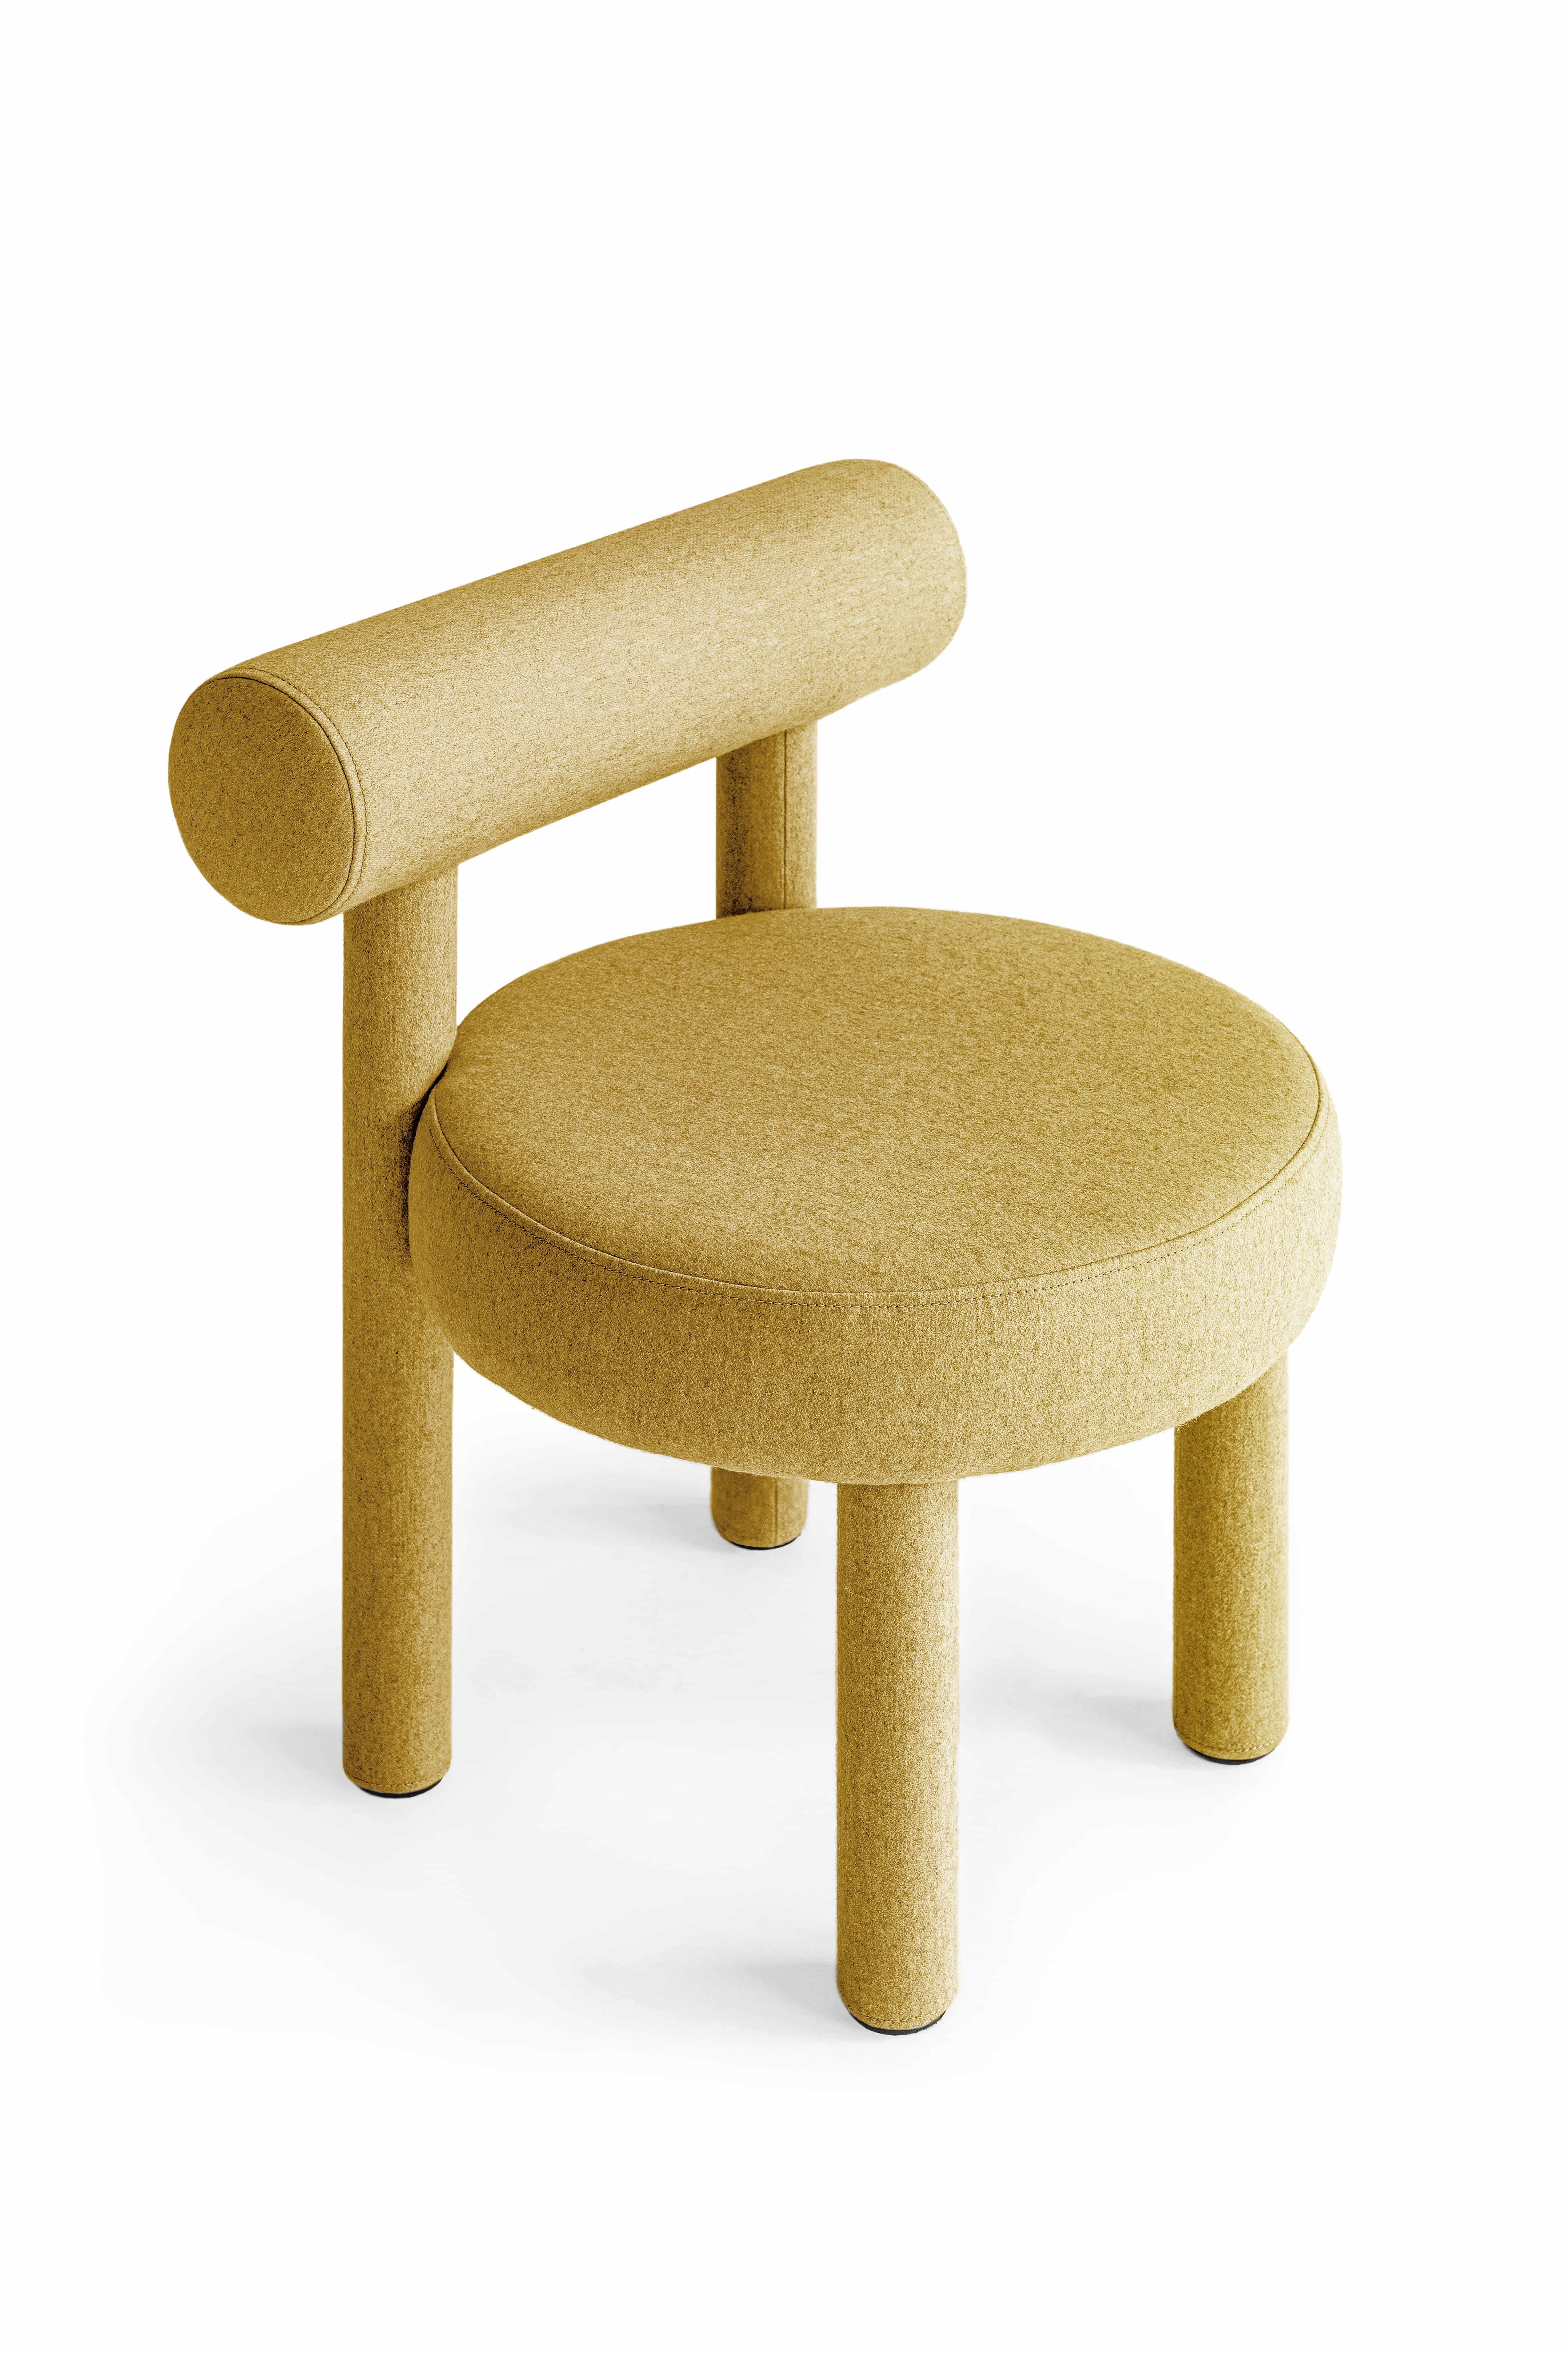 Chair Gropius CS1
Designer: Kateryna Sokolova

Model in the main picture : Collection - Wool, Color - Mustard 63

Dimensions:
Height: 74 cm / 29,13 in
Width: 57 cm / 22,44 in
Depth: 57 cm / 22,44 in
Seat height: 47 cm / 18,11 in

New NOOM furniture